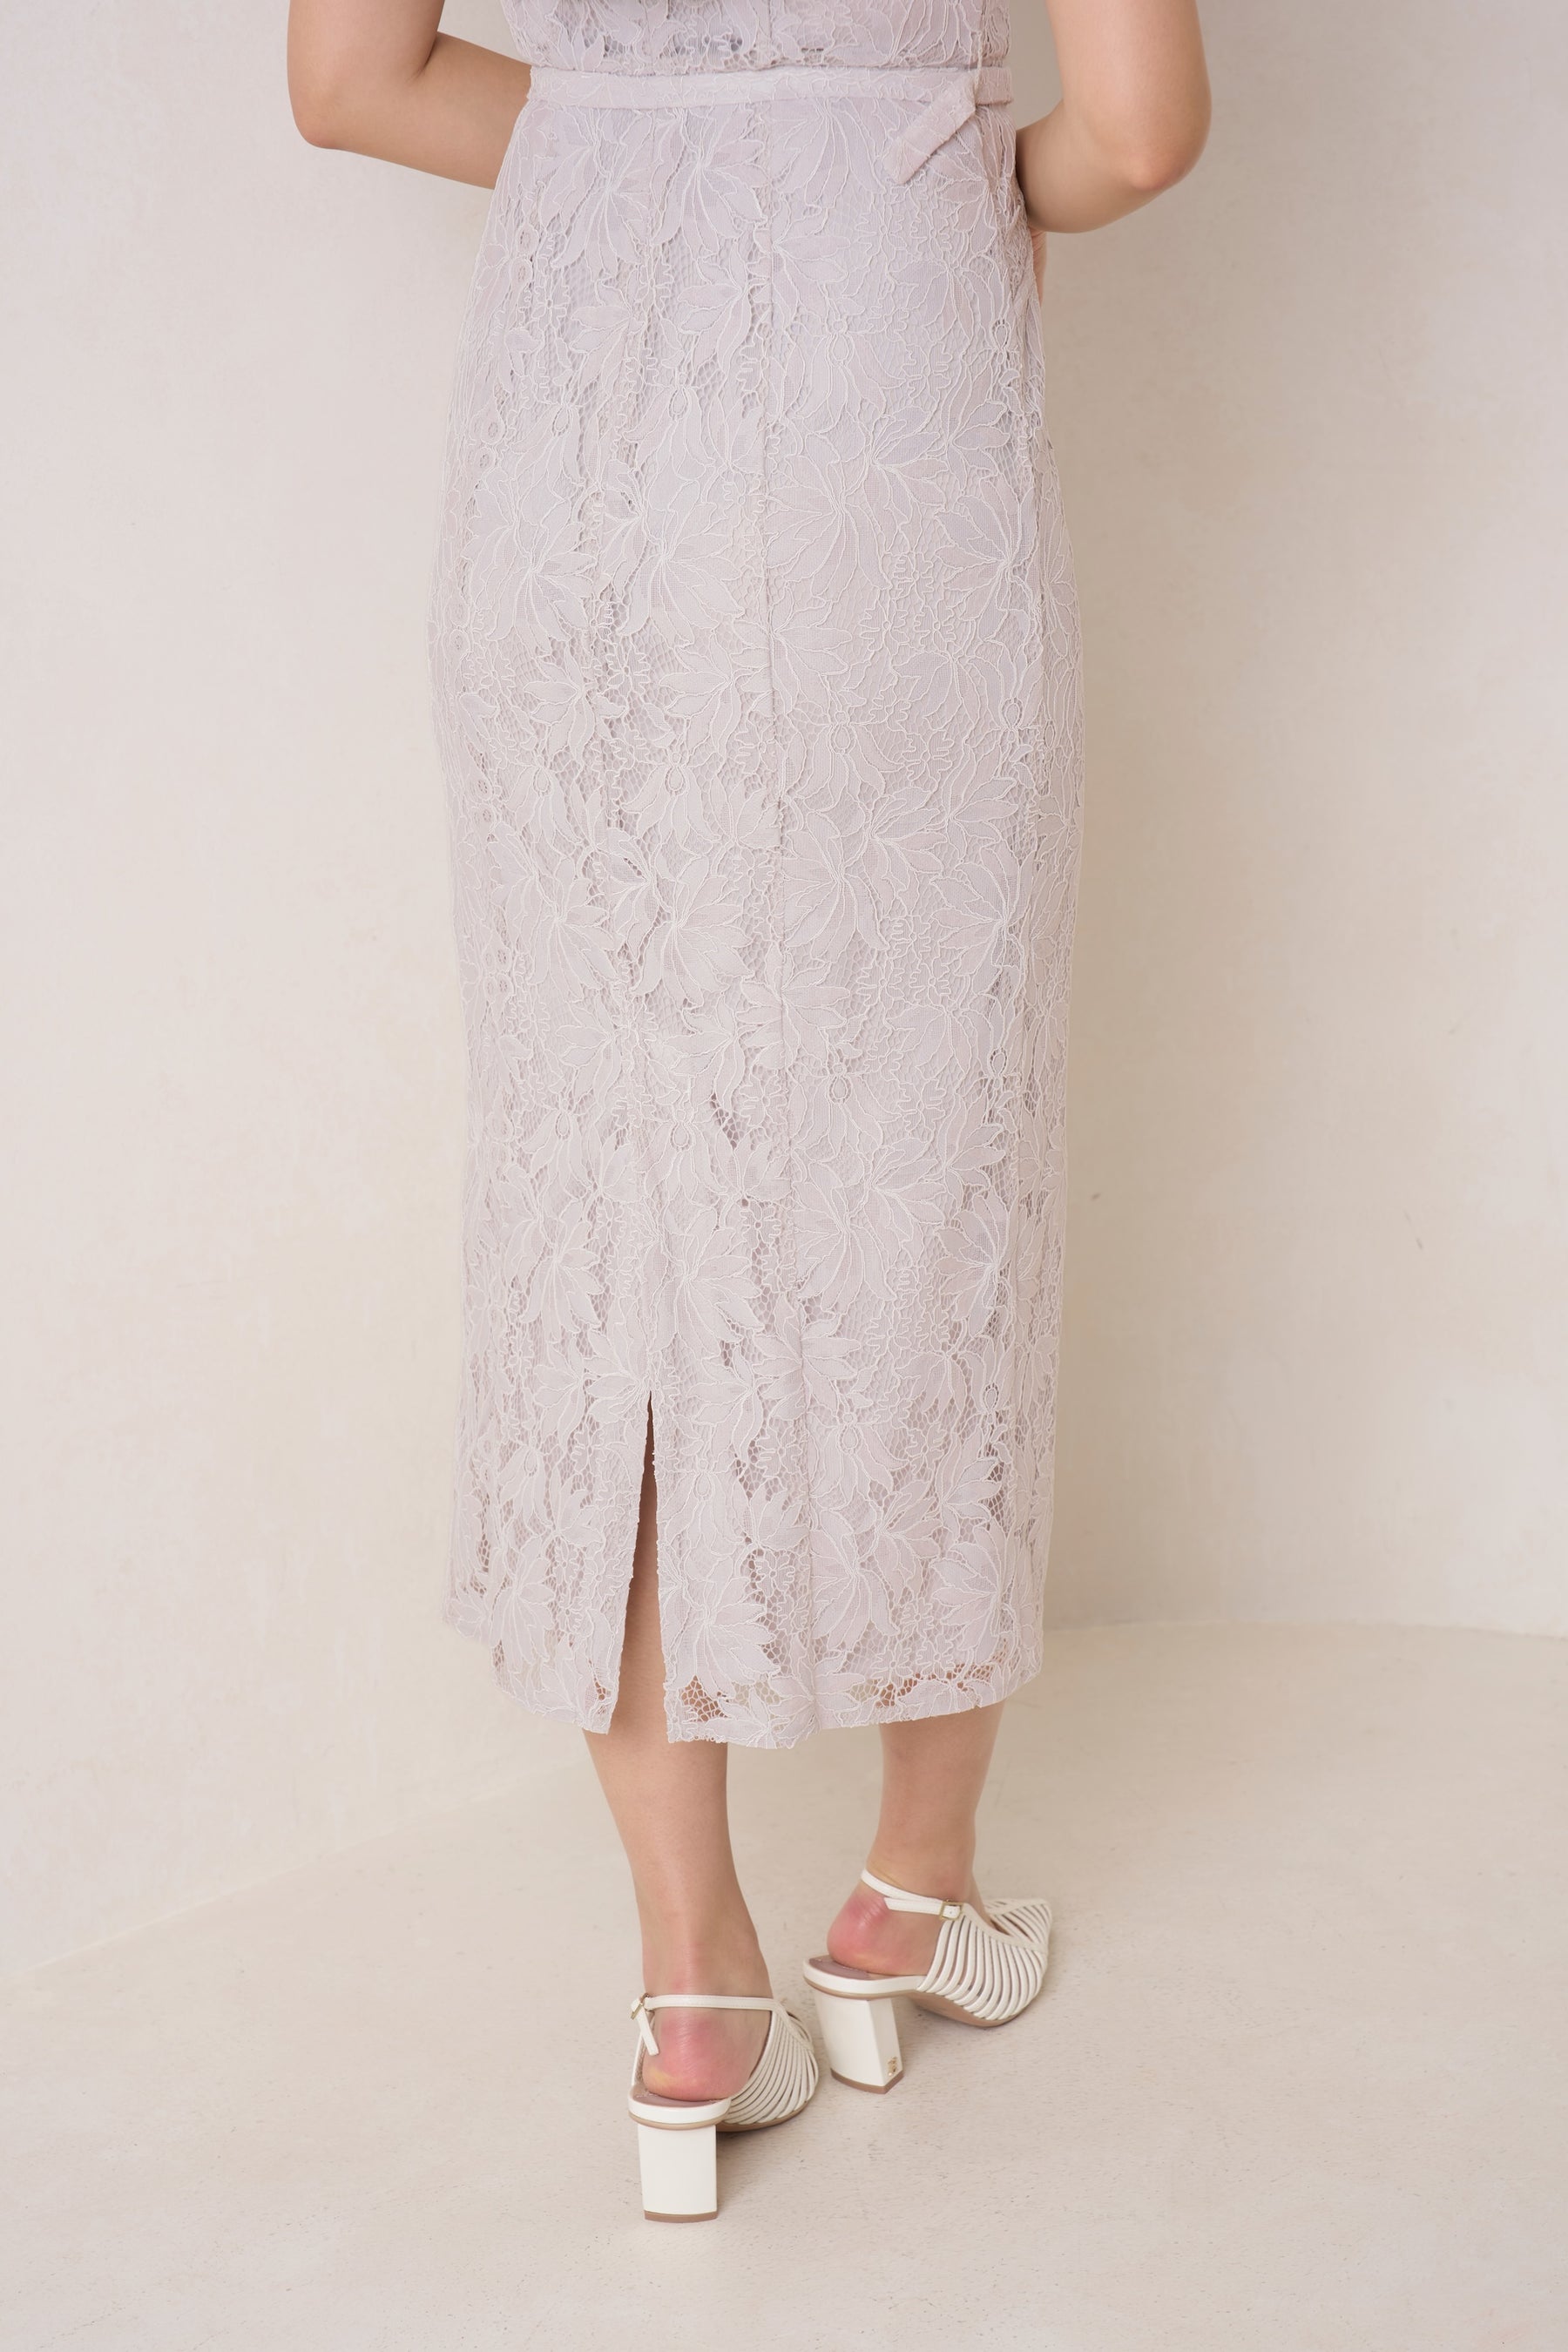 【pure white】Waltz Floral Lace Belted Dress